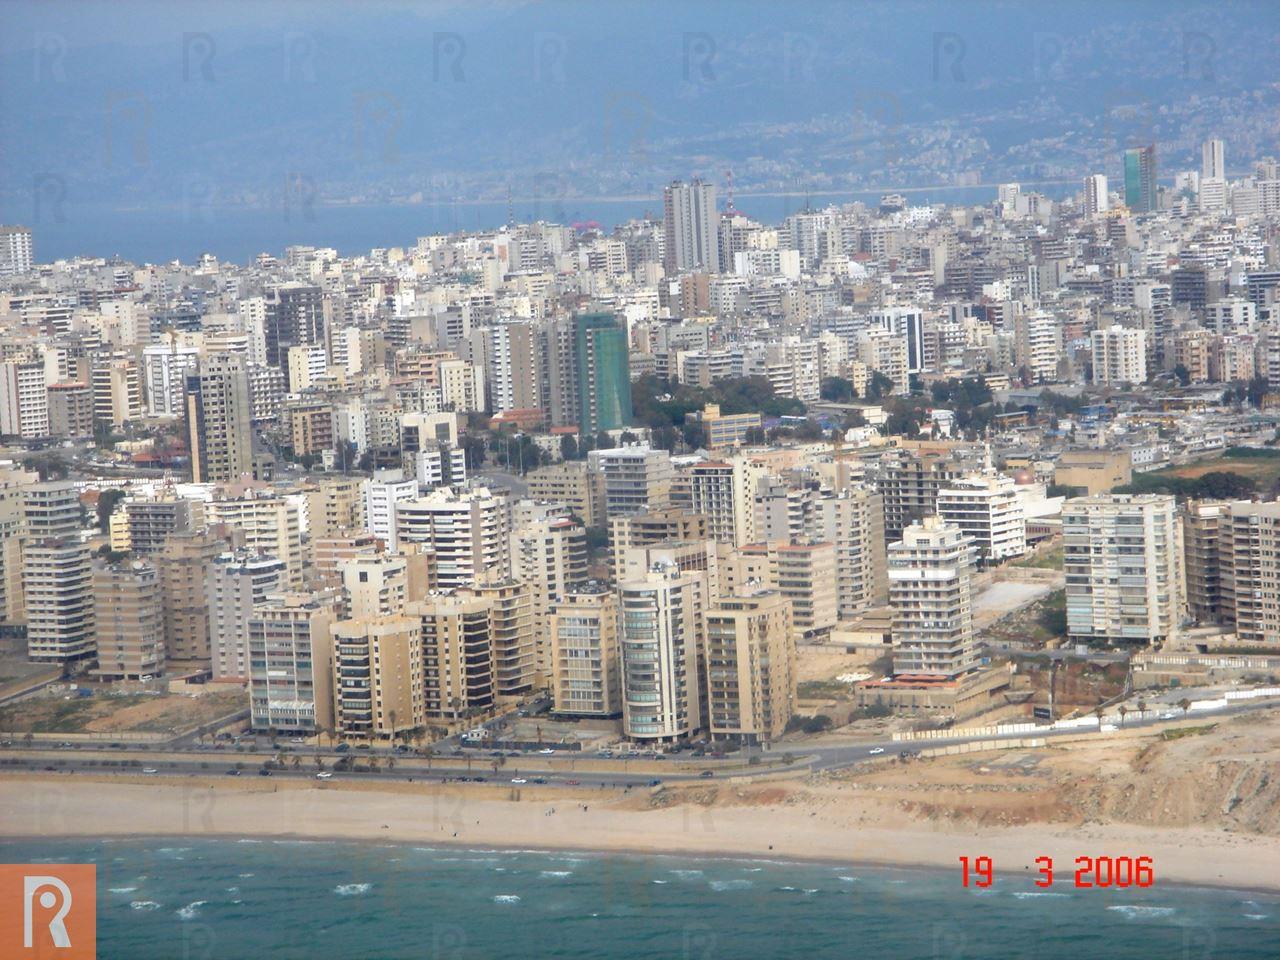 Photos of Beirut from the plane in 2006